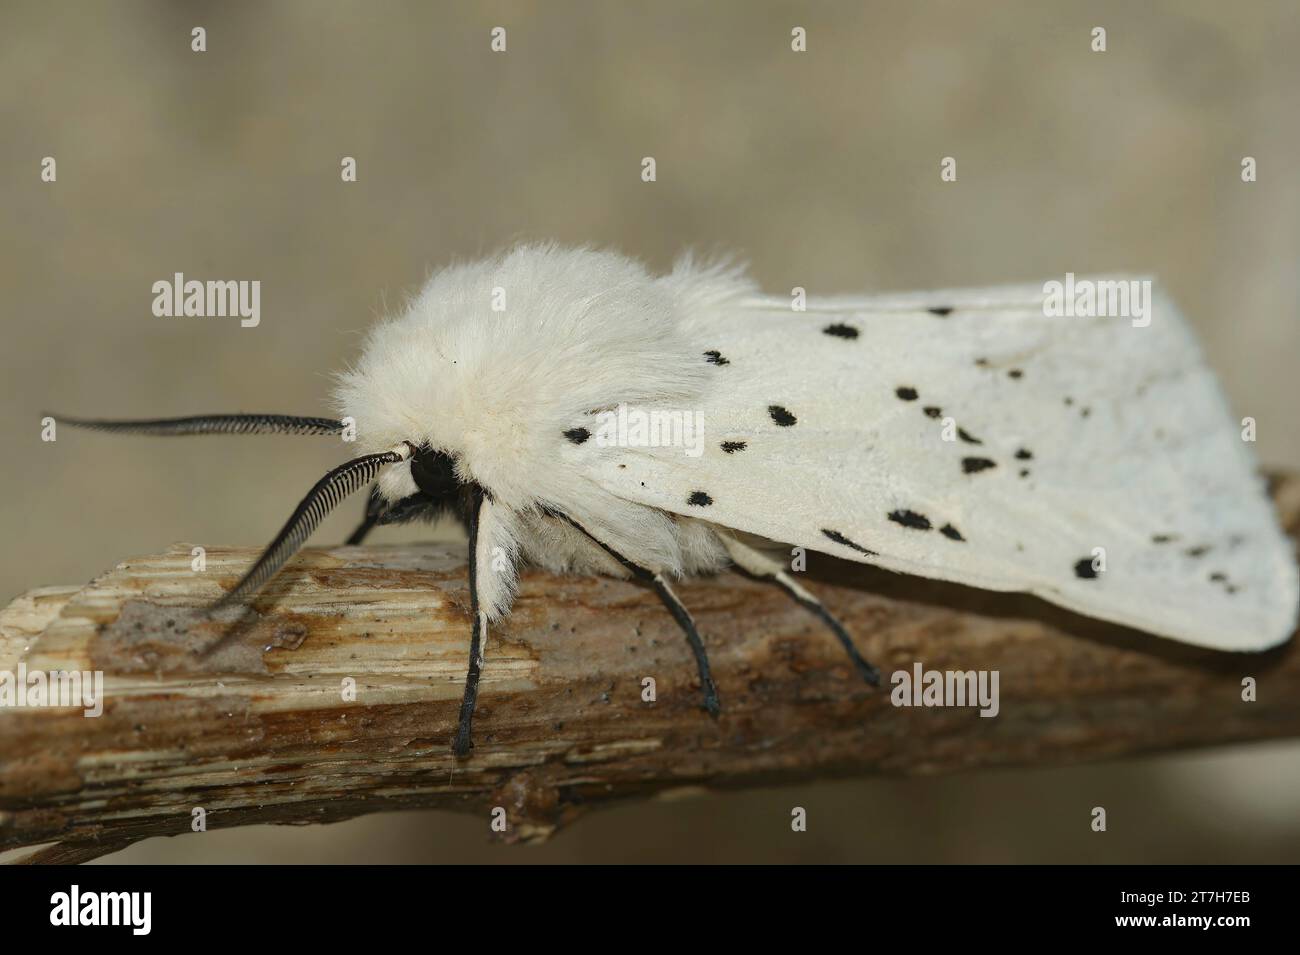 Natural closeup on a white Ermine tussock moth, Spilosoma lubricipeda, sitting on a twig Stock Photo